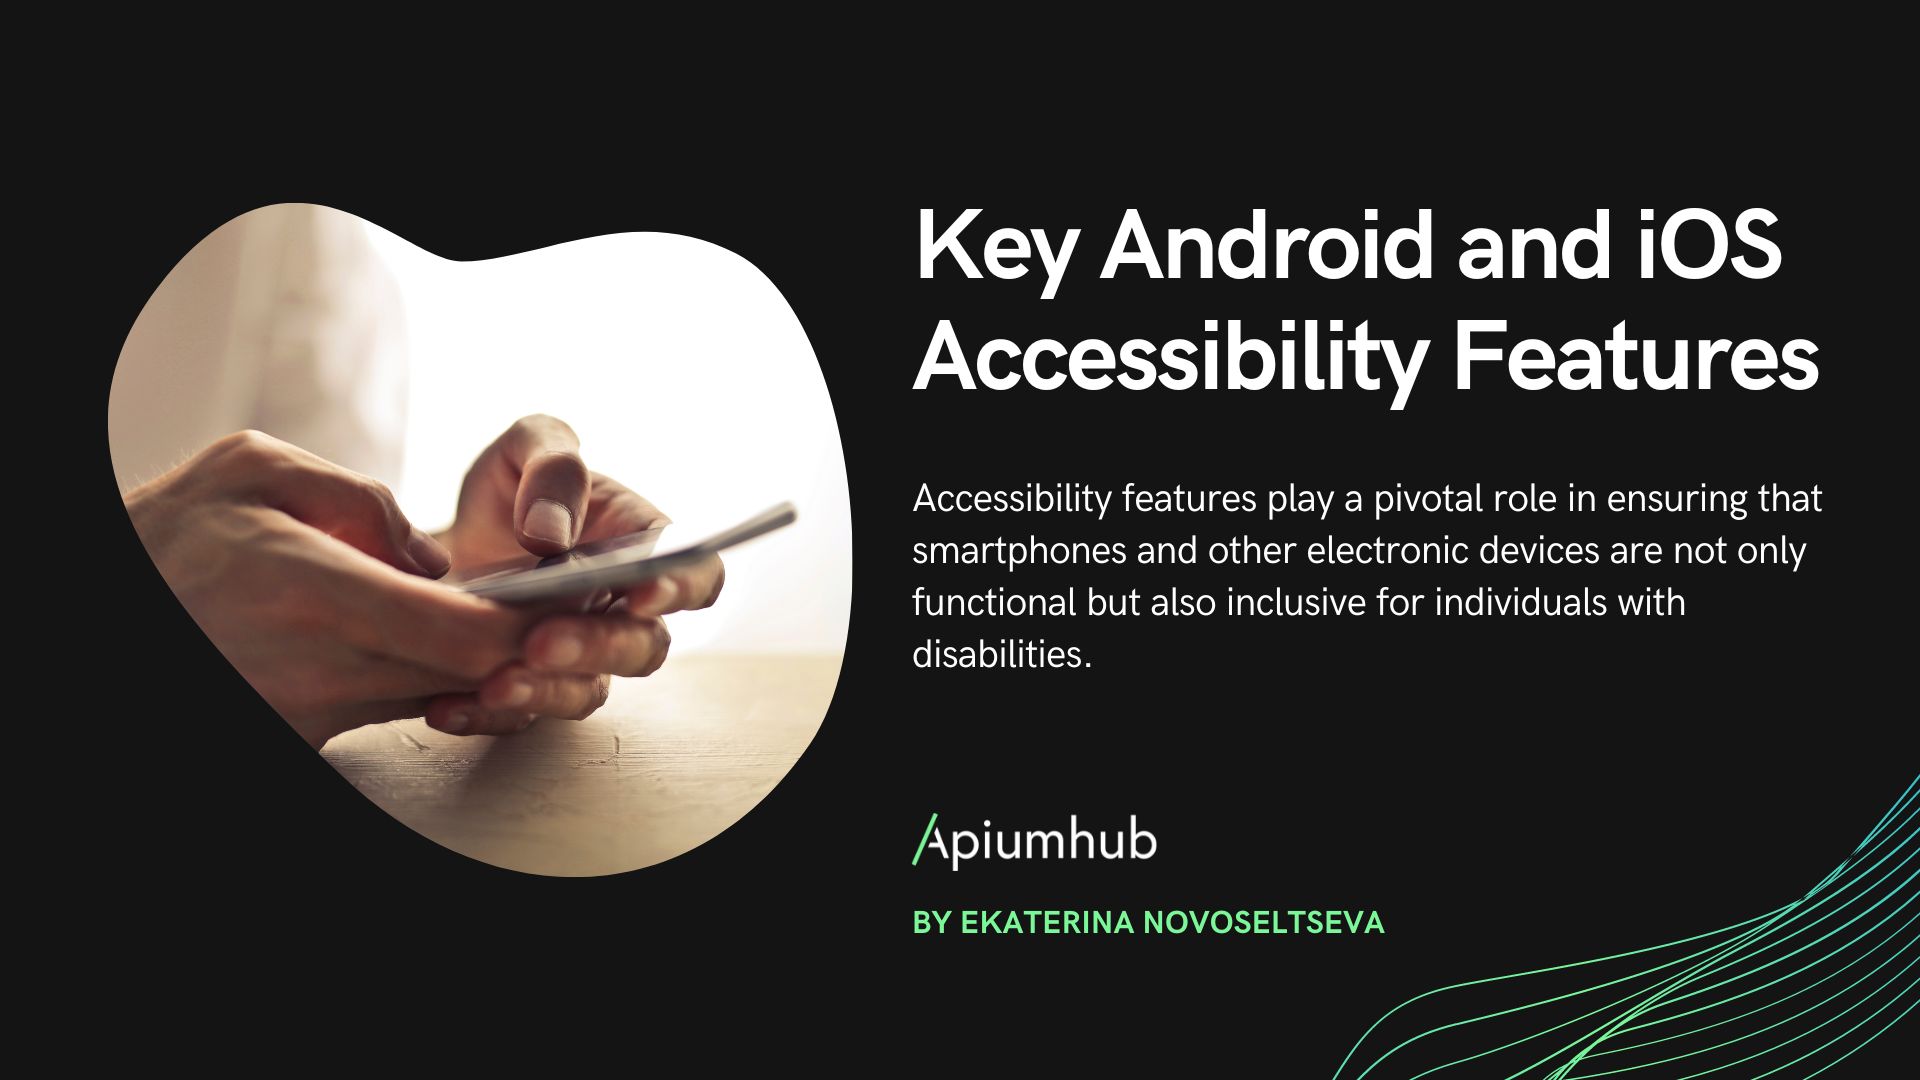 Key Android and iOS Accessibility Features